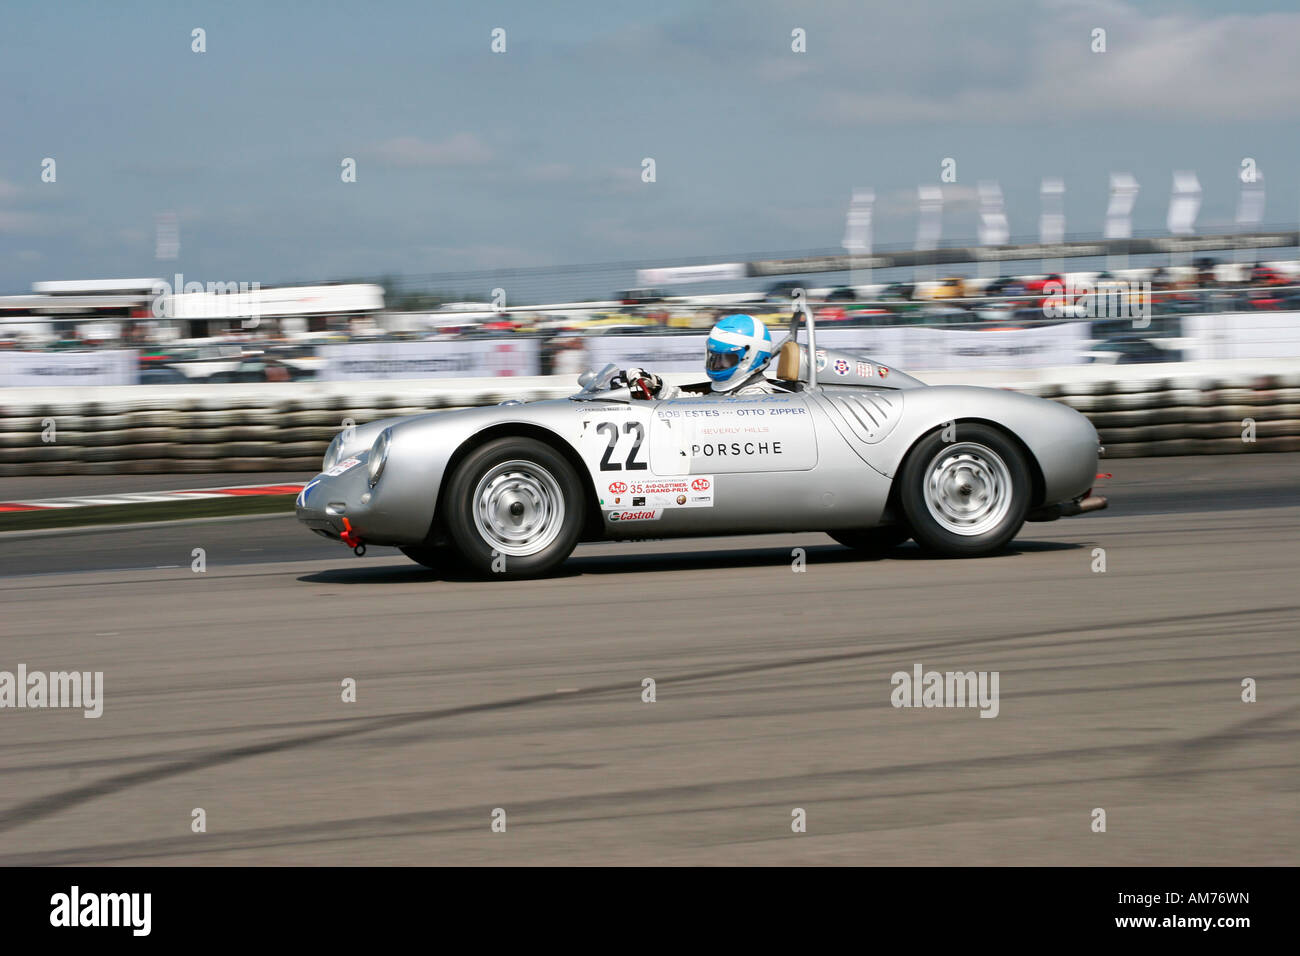 Porsche 550, year of construction 1957, Vintage cars Grand Prix Nuerburgring 2007, Germany Stock Photo